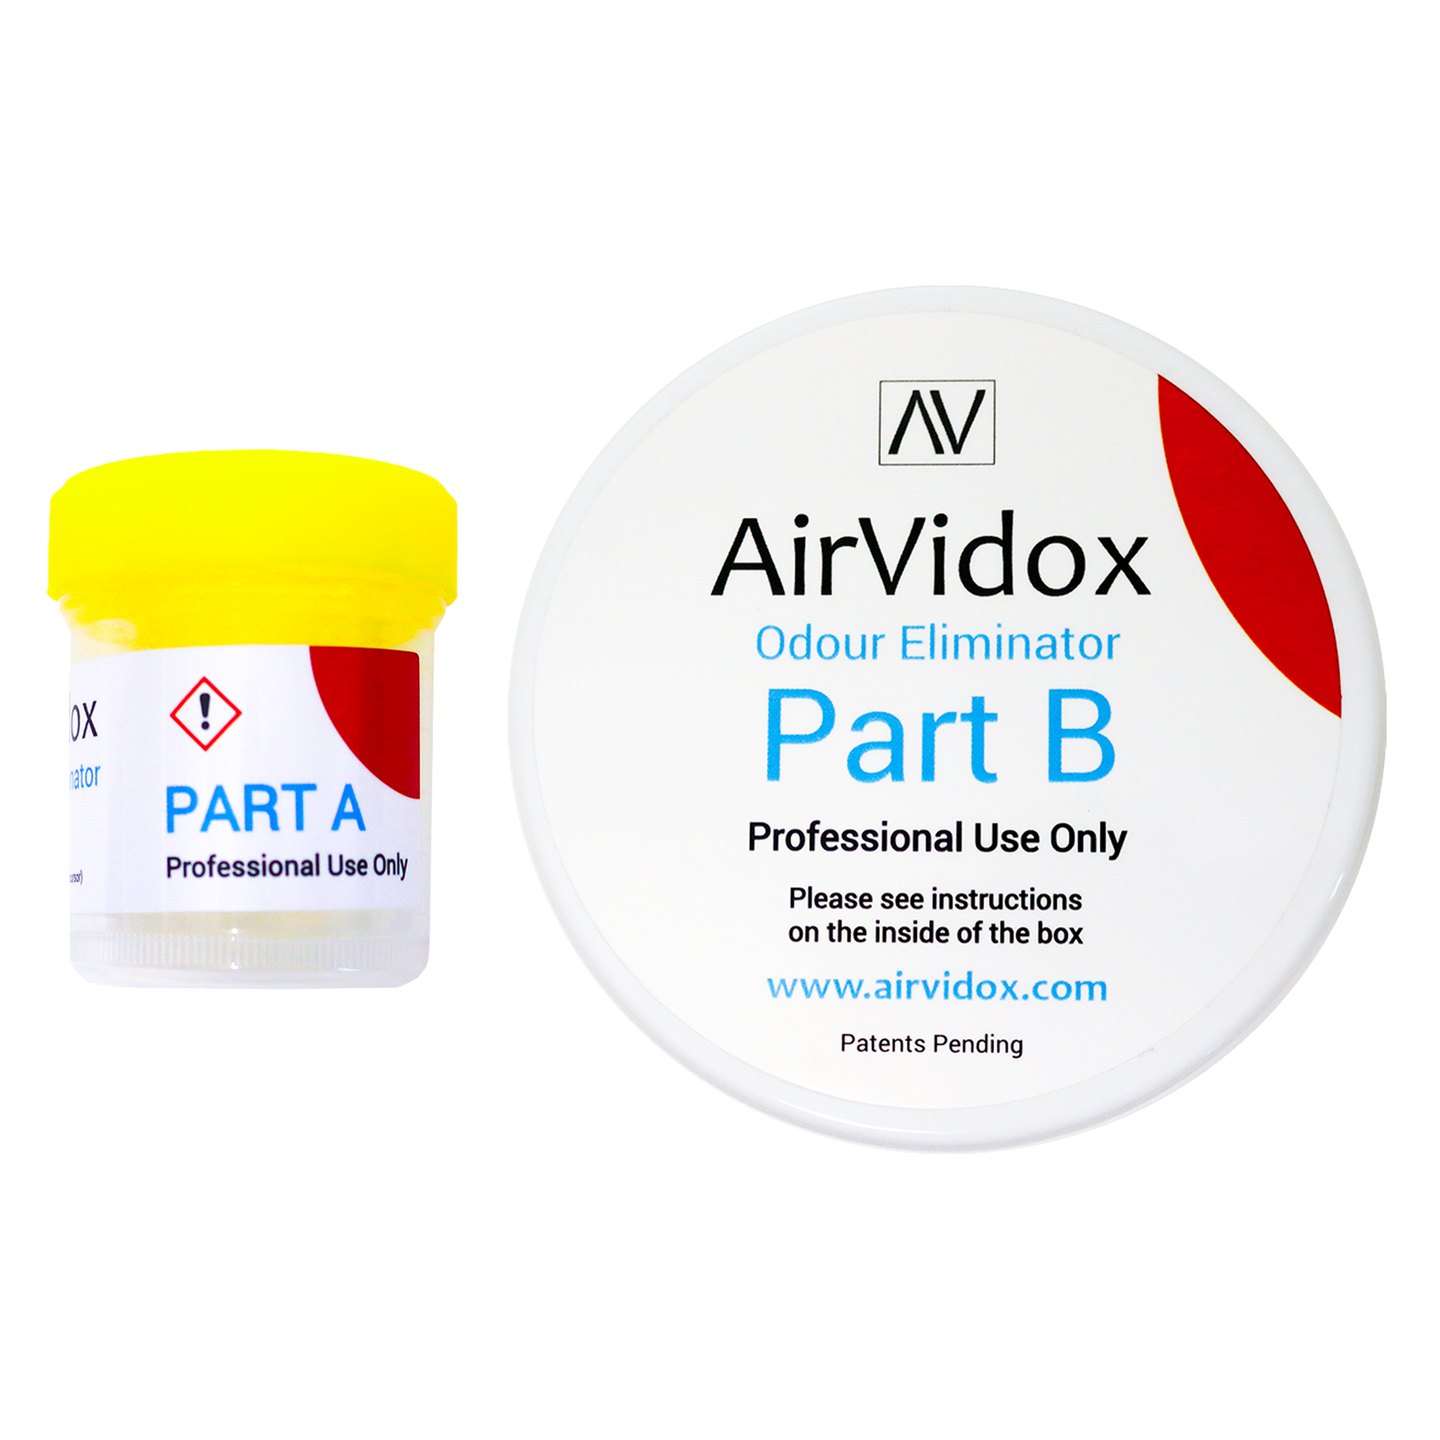 Airvidox Car Odour Eliminator for Professional Use Only (in multiples of 6)